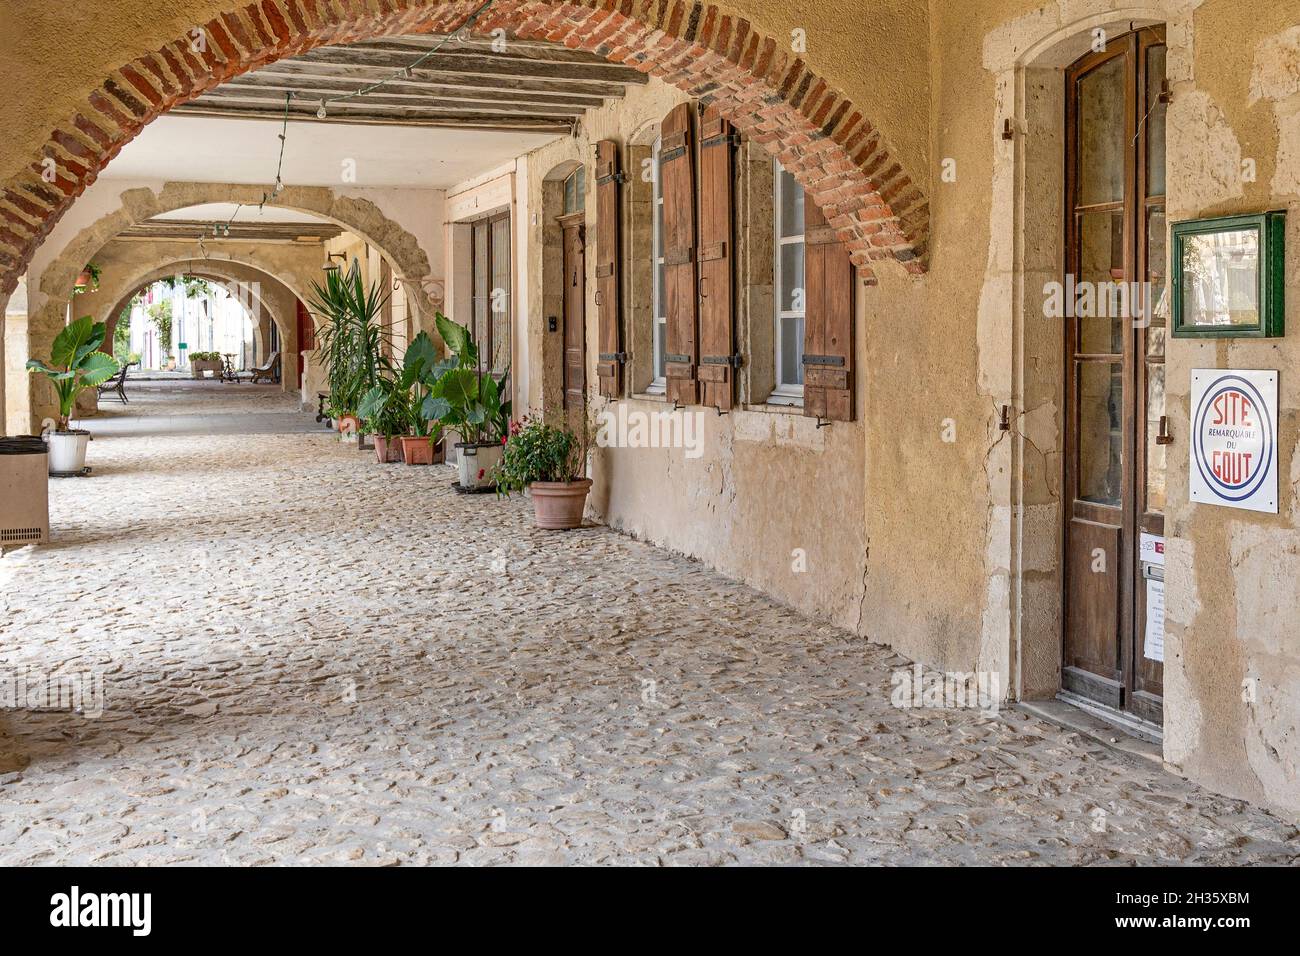 The arcades of the square 'Place Royale' at Labastide-d'Armagnac, Bas-Armagnac, France Stock Photo